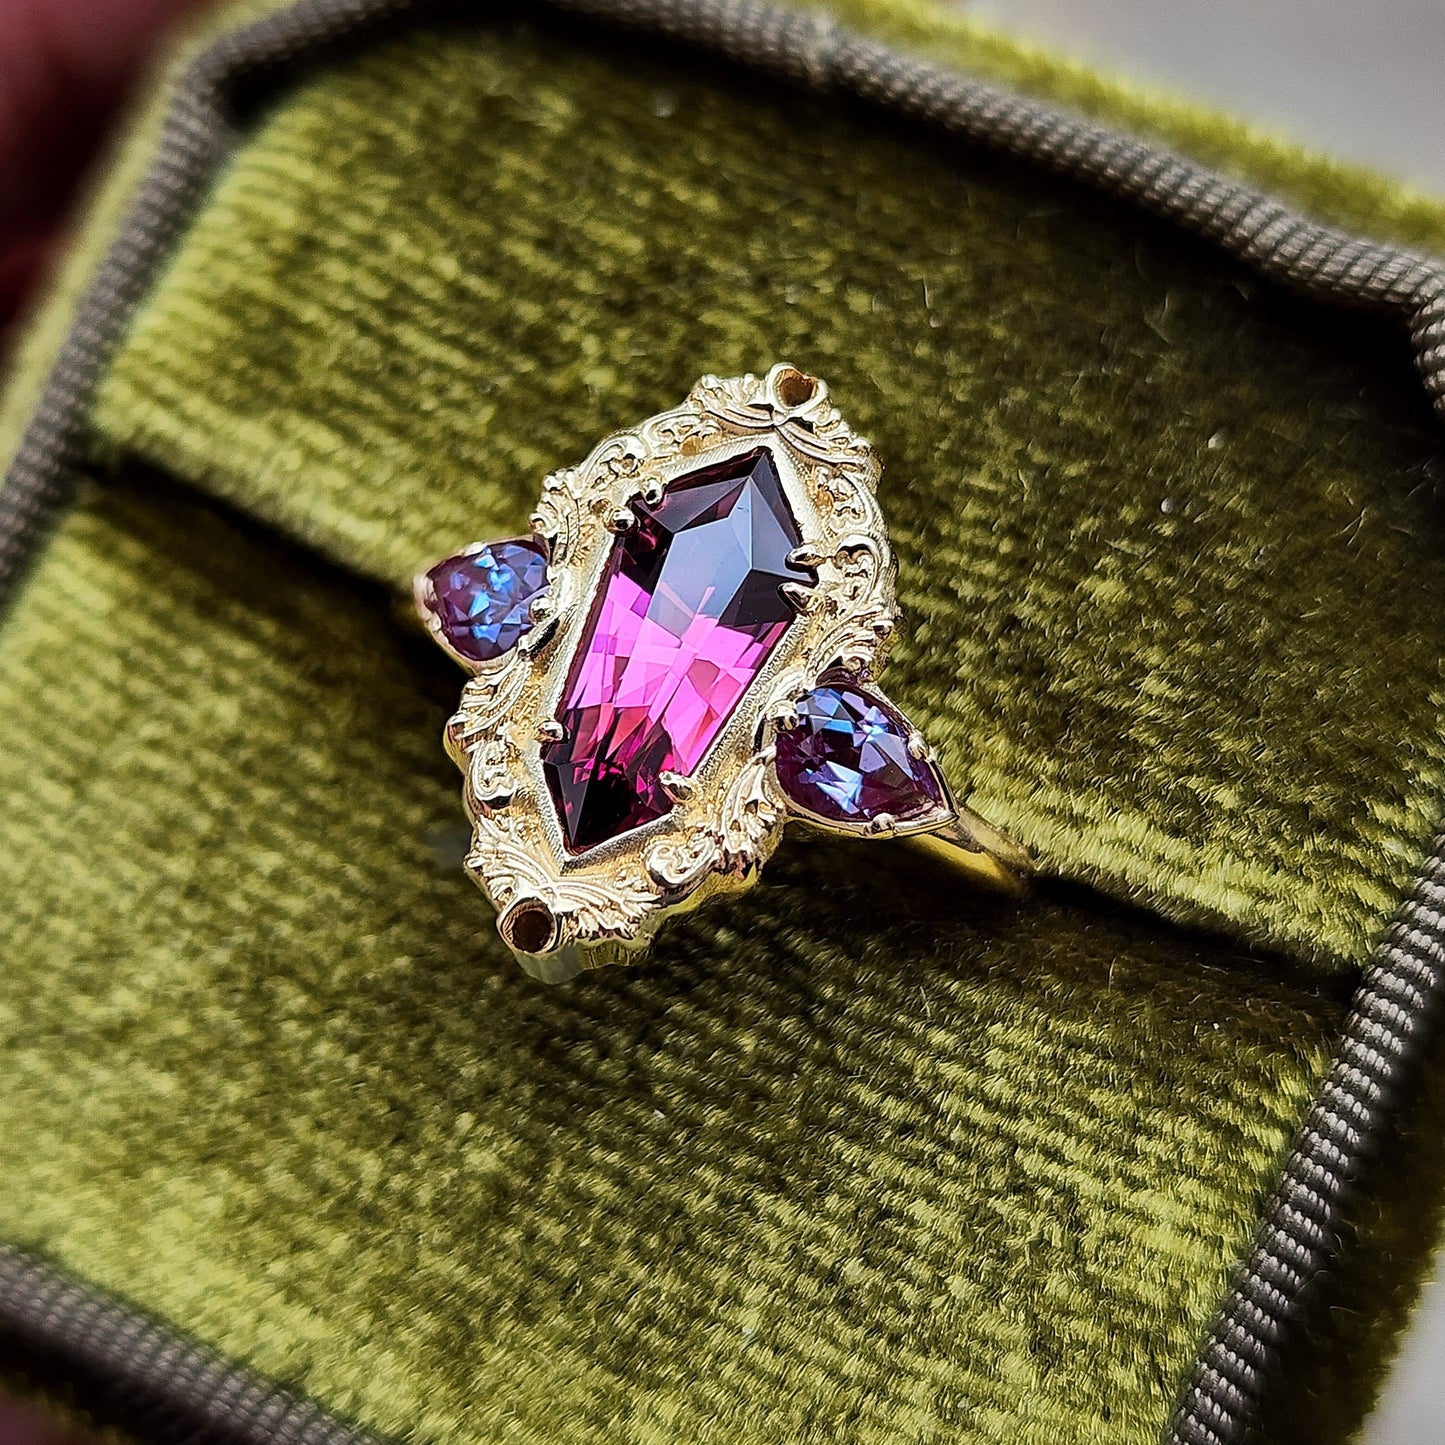 Looking Glass Ring - Fancy Color Change Tanzanian Garnet & Chatham Alexandrite Pear Gold Scroll Ring Size 6-8 14k Yellow Gold